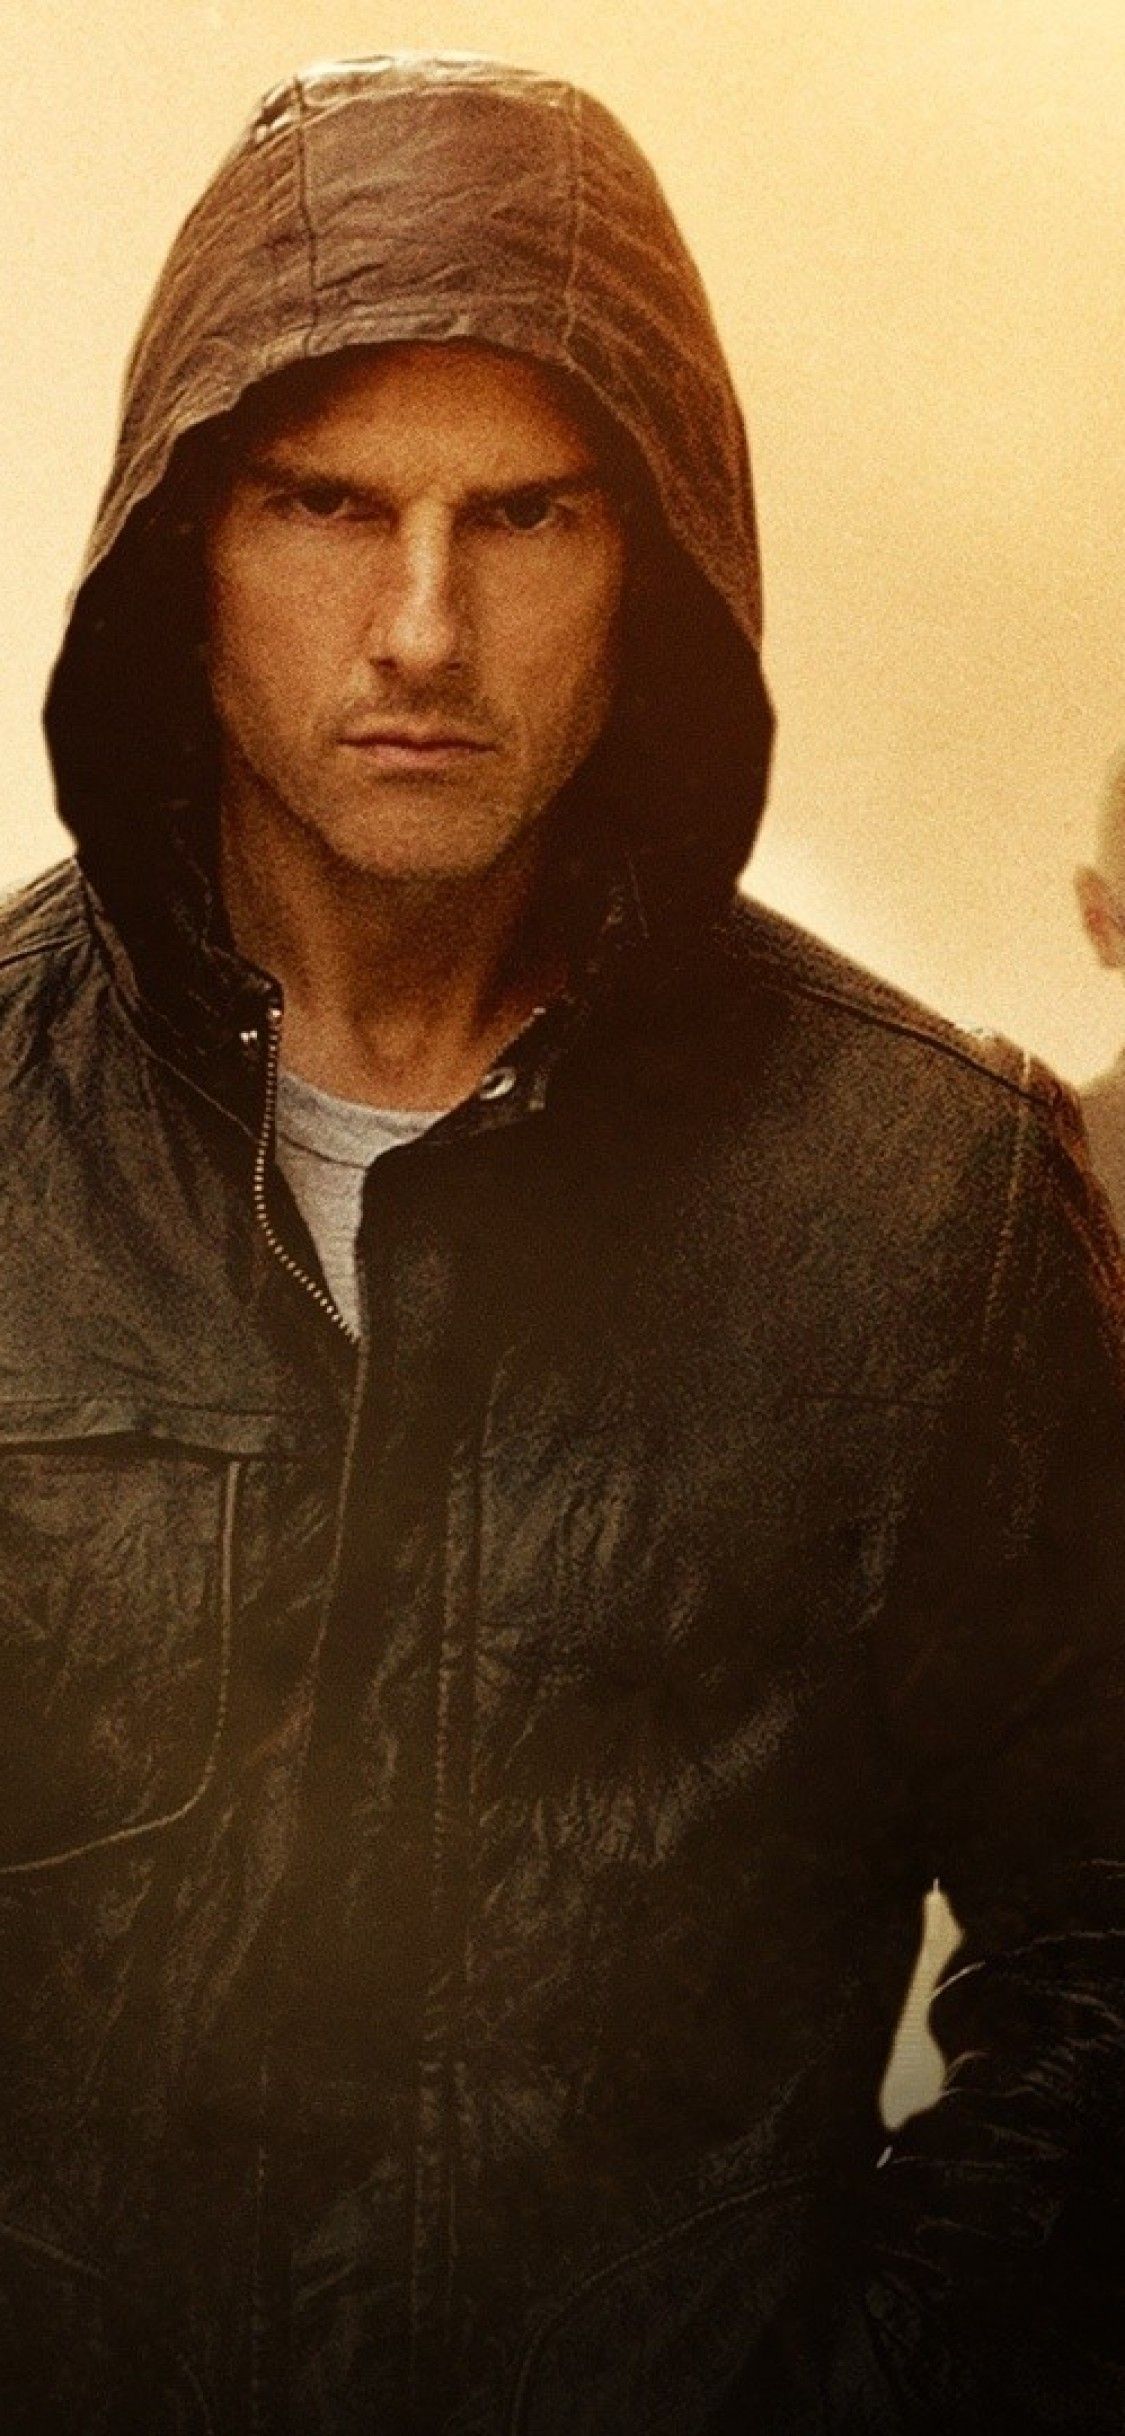 Tom Cruise iPhone Wallpapers - Wallpaper Cave